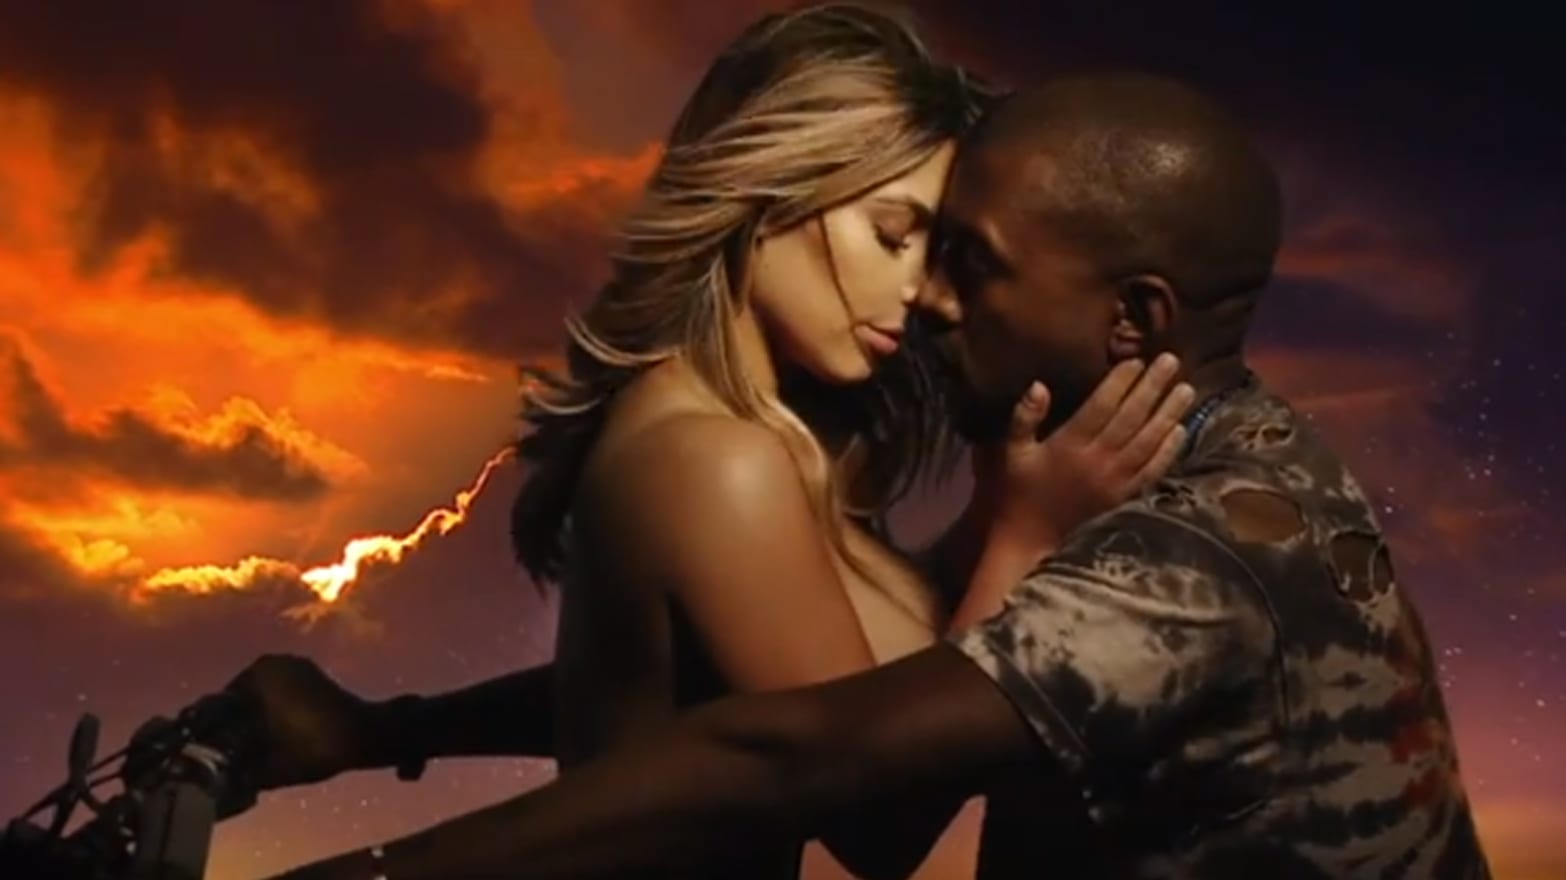 Kanye West Straddles A Nude Kim Kardashian In the Wild Music Video For “Bound 2” image